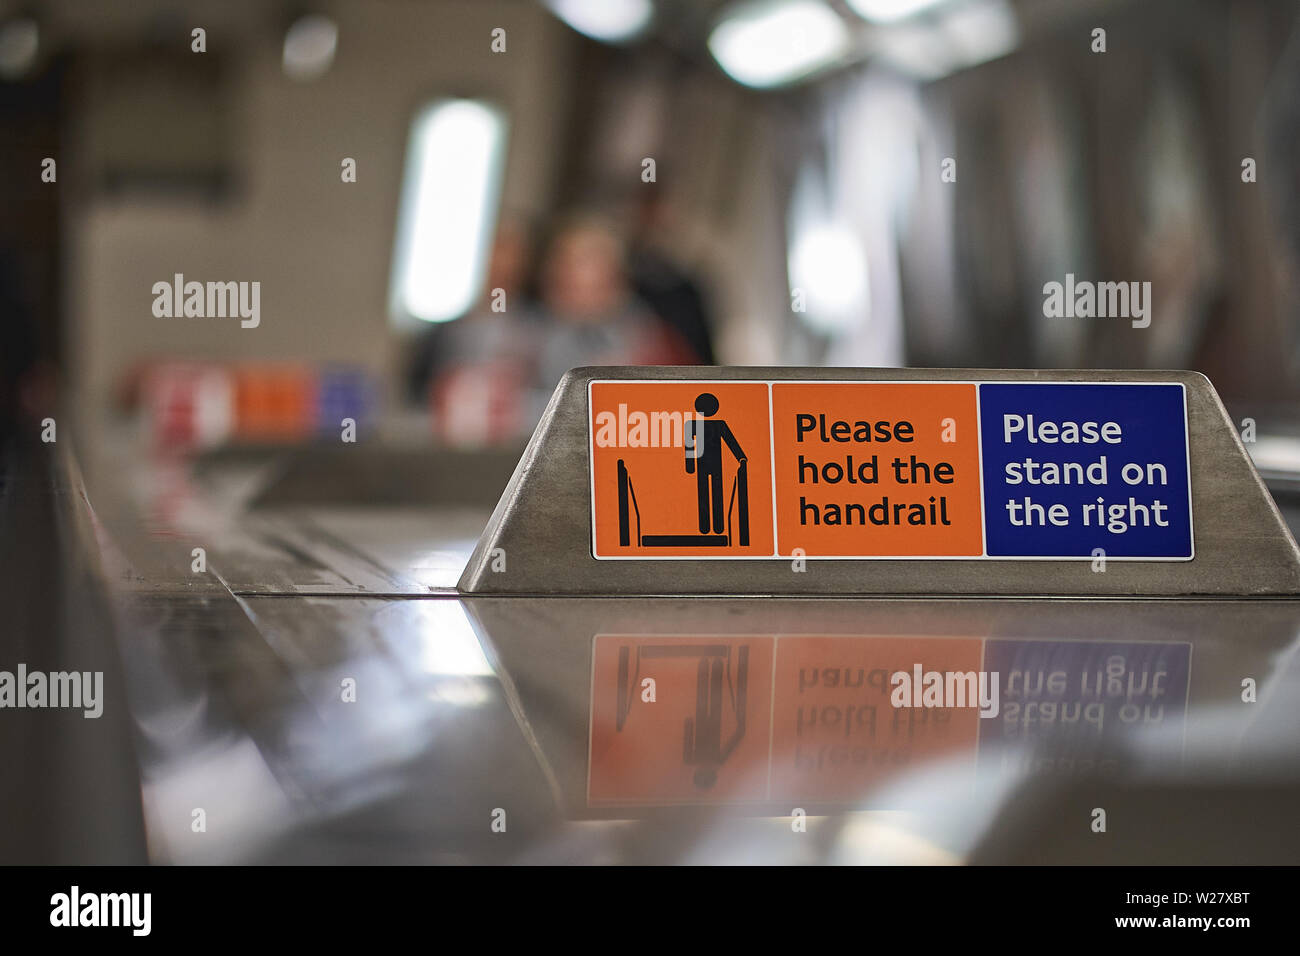 A 'Please stand on the right' sign on an escalator in a London Tube Station. Landscape format. Stock Photo